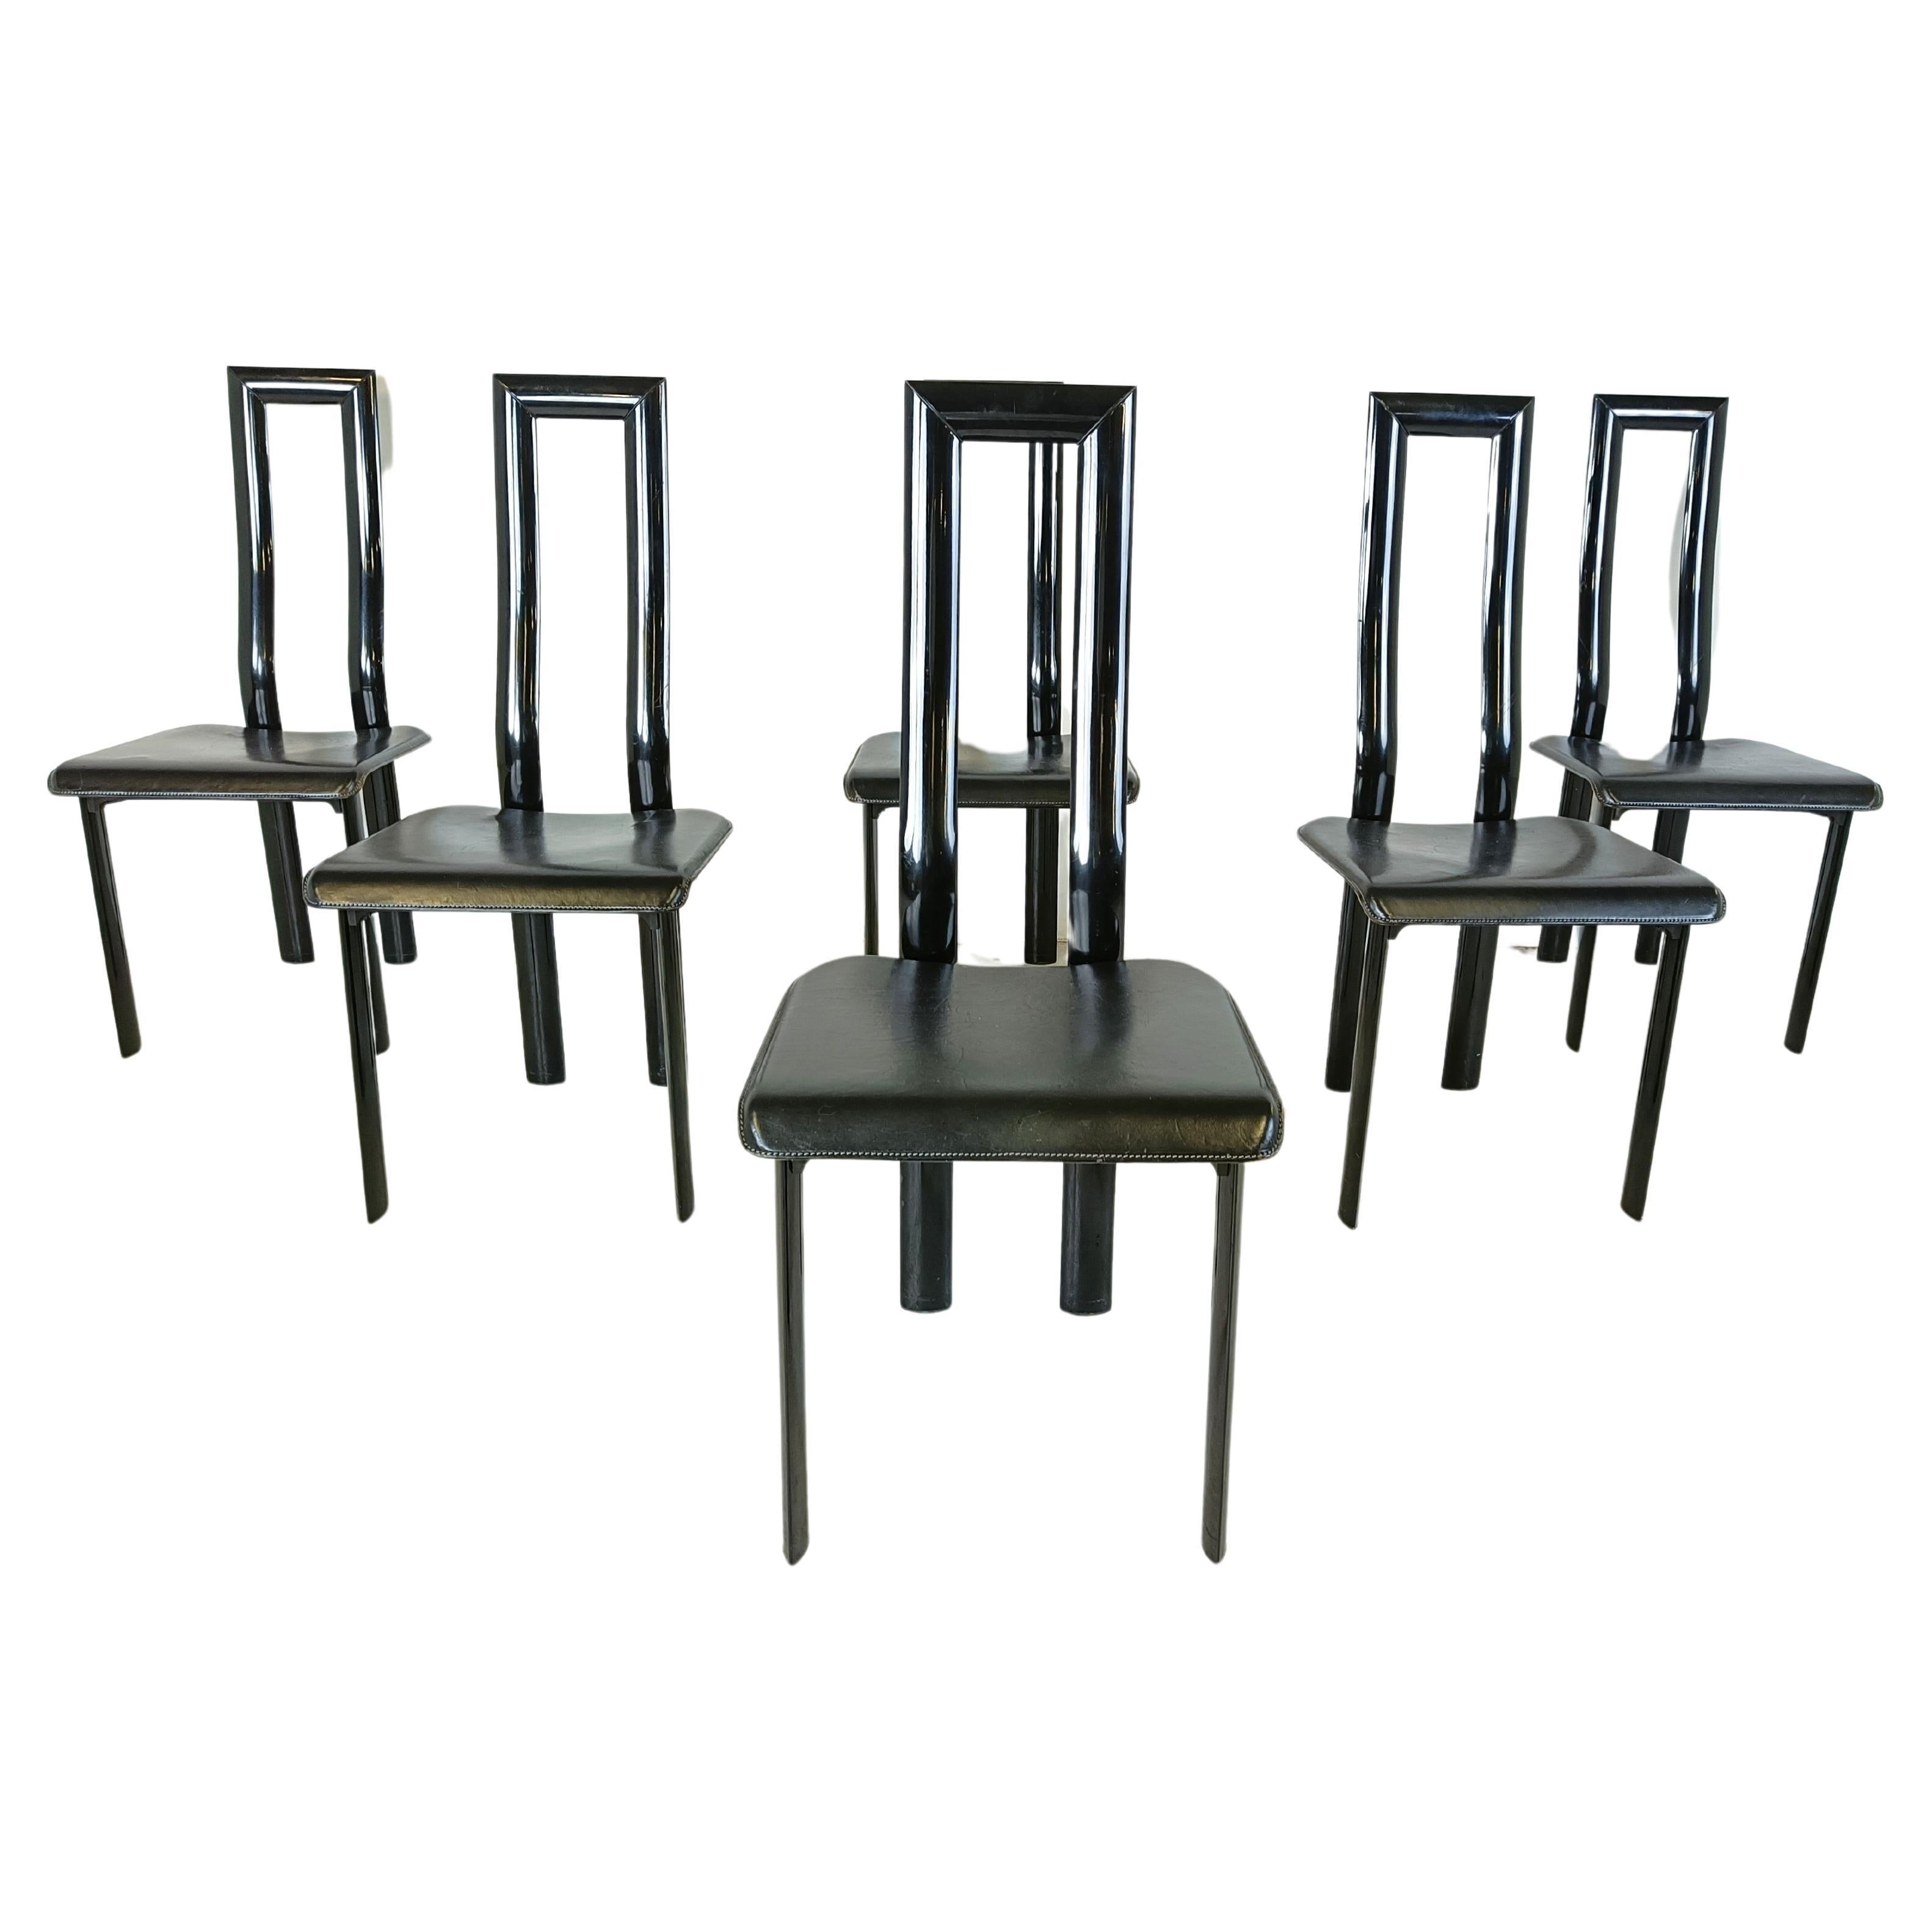 Italian Model Regia Dining Chairs by Antonello Mosca for Ycami, 1980s, Set of 6